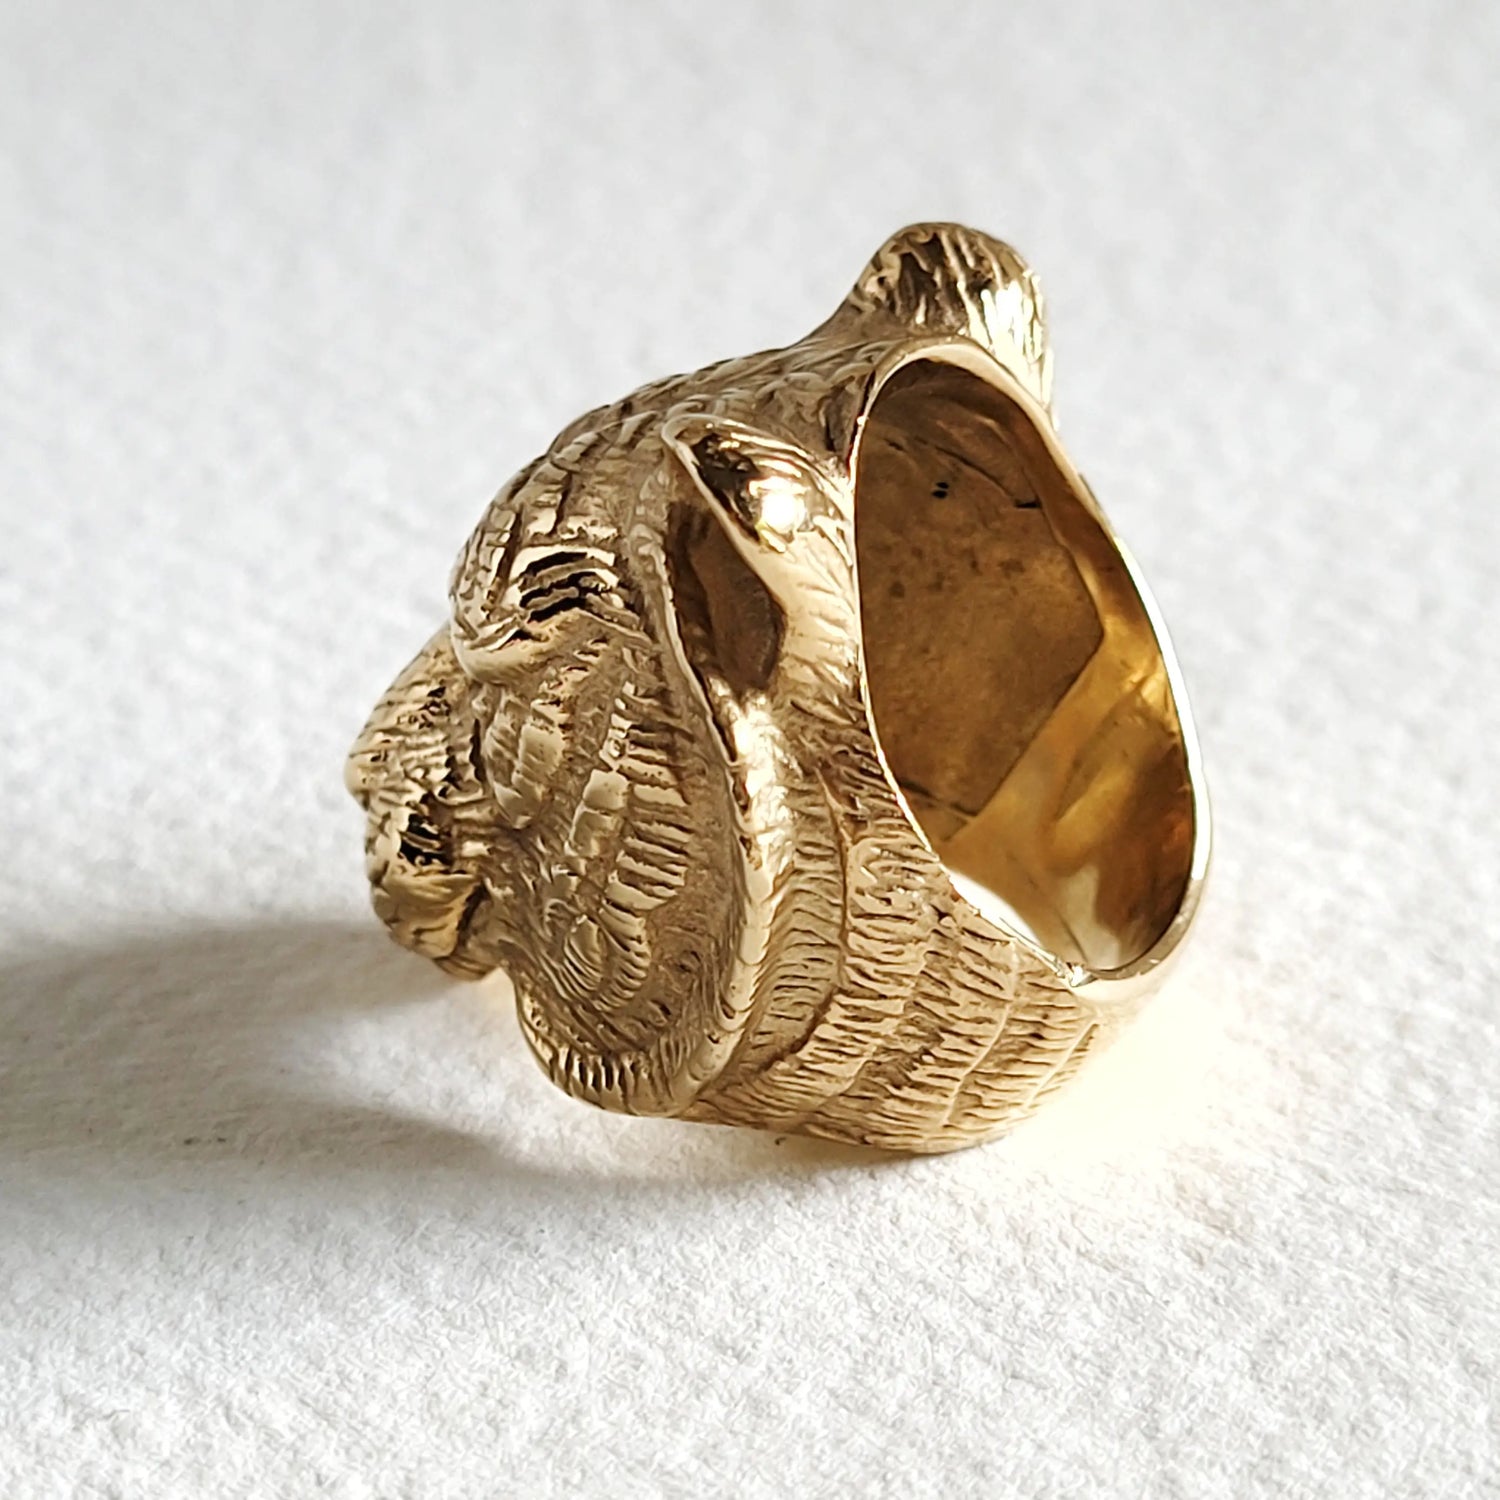 Tiger Lion Animal Ring 18 kt Gold Plated Size 8 - Moon Room Shop and Wellness